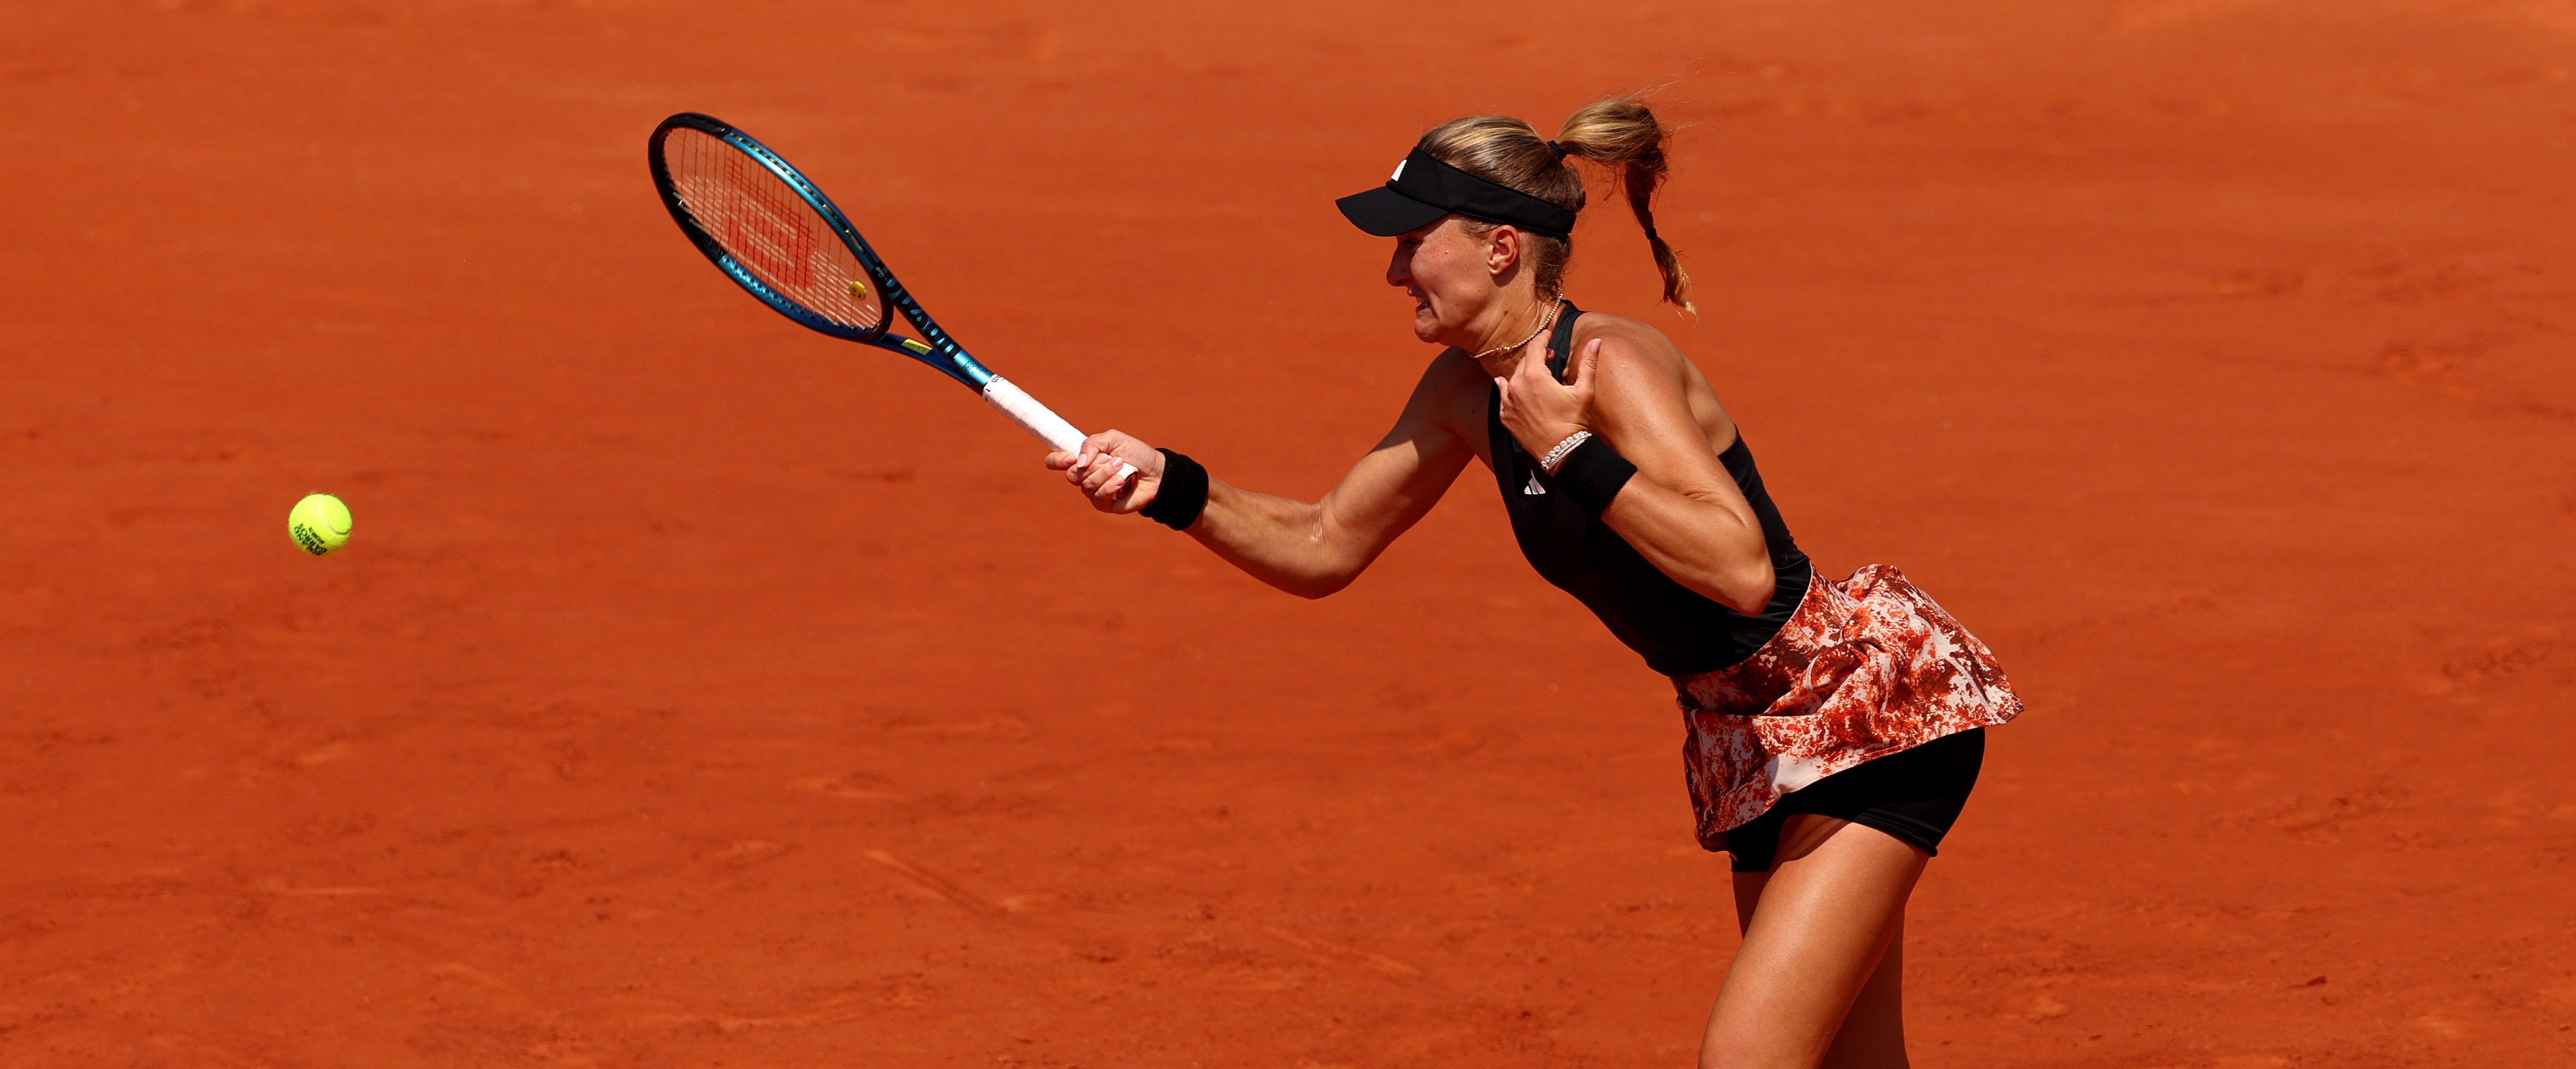 PARIS, FRANCE - MAY 29: Kristina Mladenovic of France plays a forehand against Karla Day of United States during their Women's Singles First Round Match on Day Two of the 2023 French Open at Roland Garros on May 29, 2023 in Paris, France.